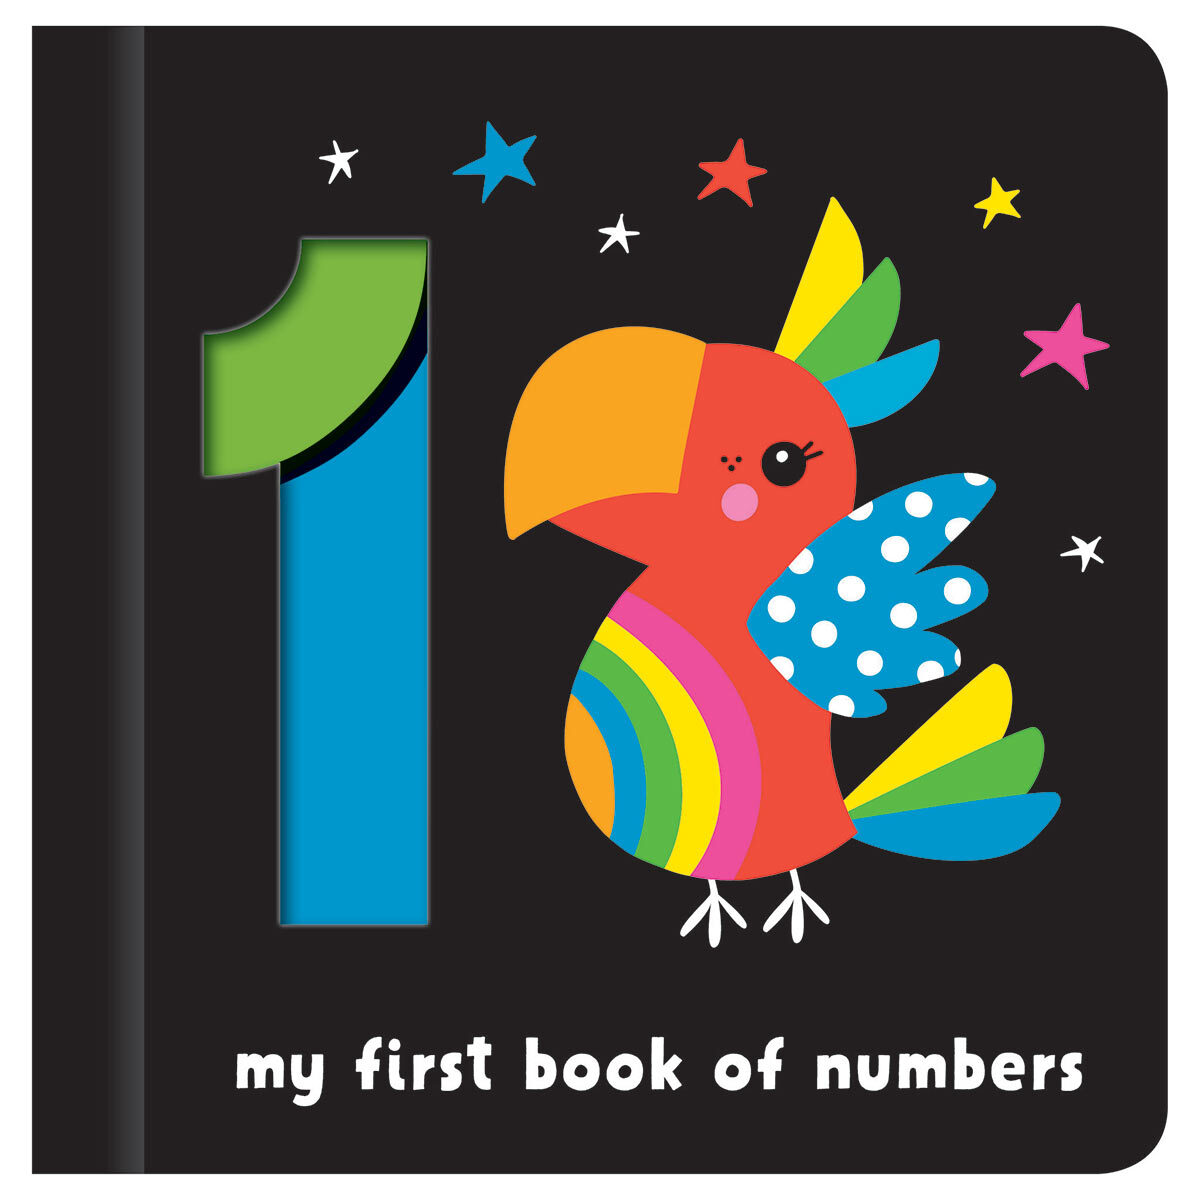 UK　Book　First　Numbers　Costco　My　of